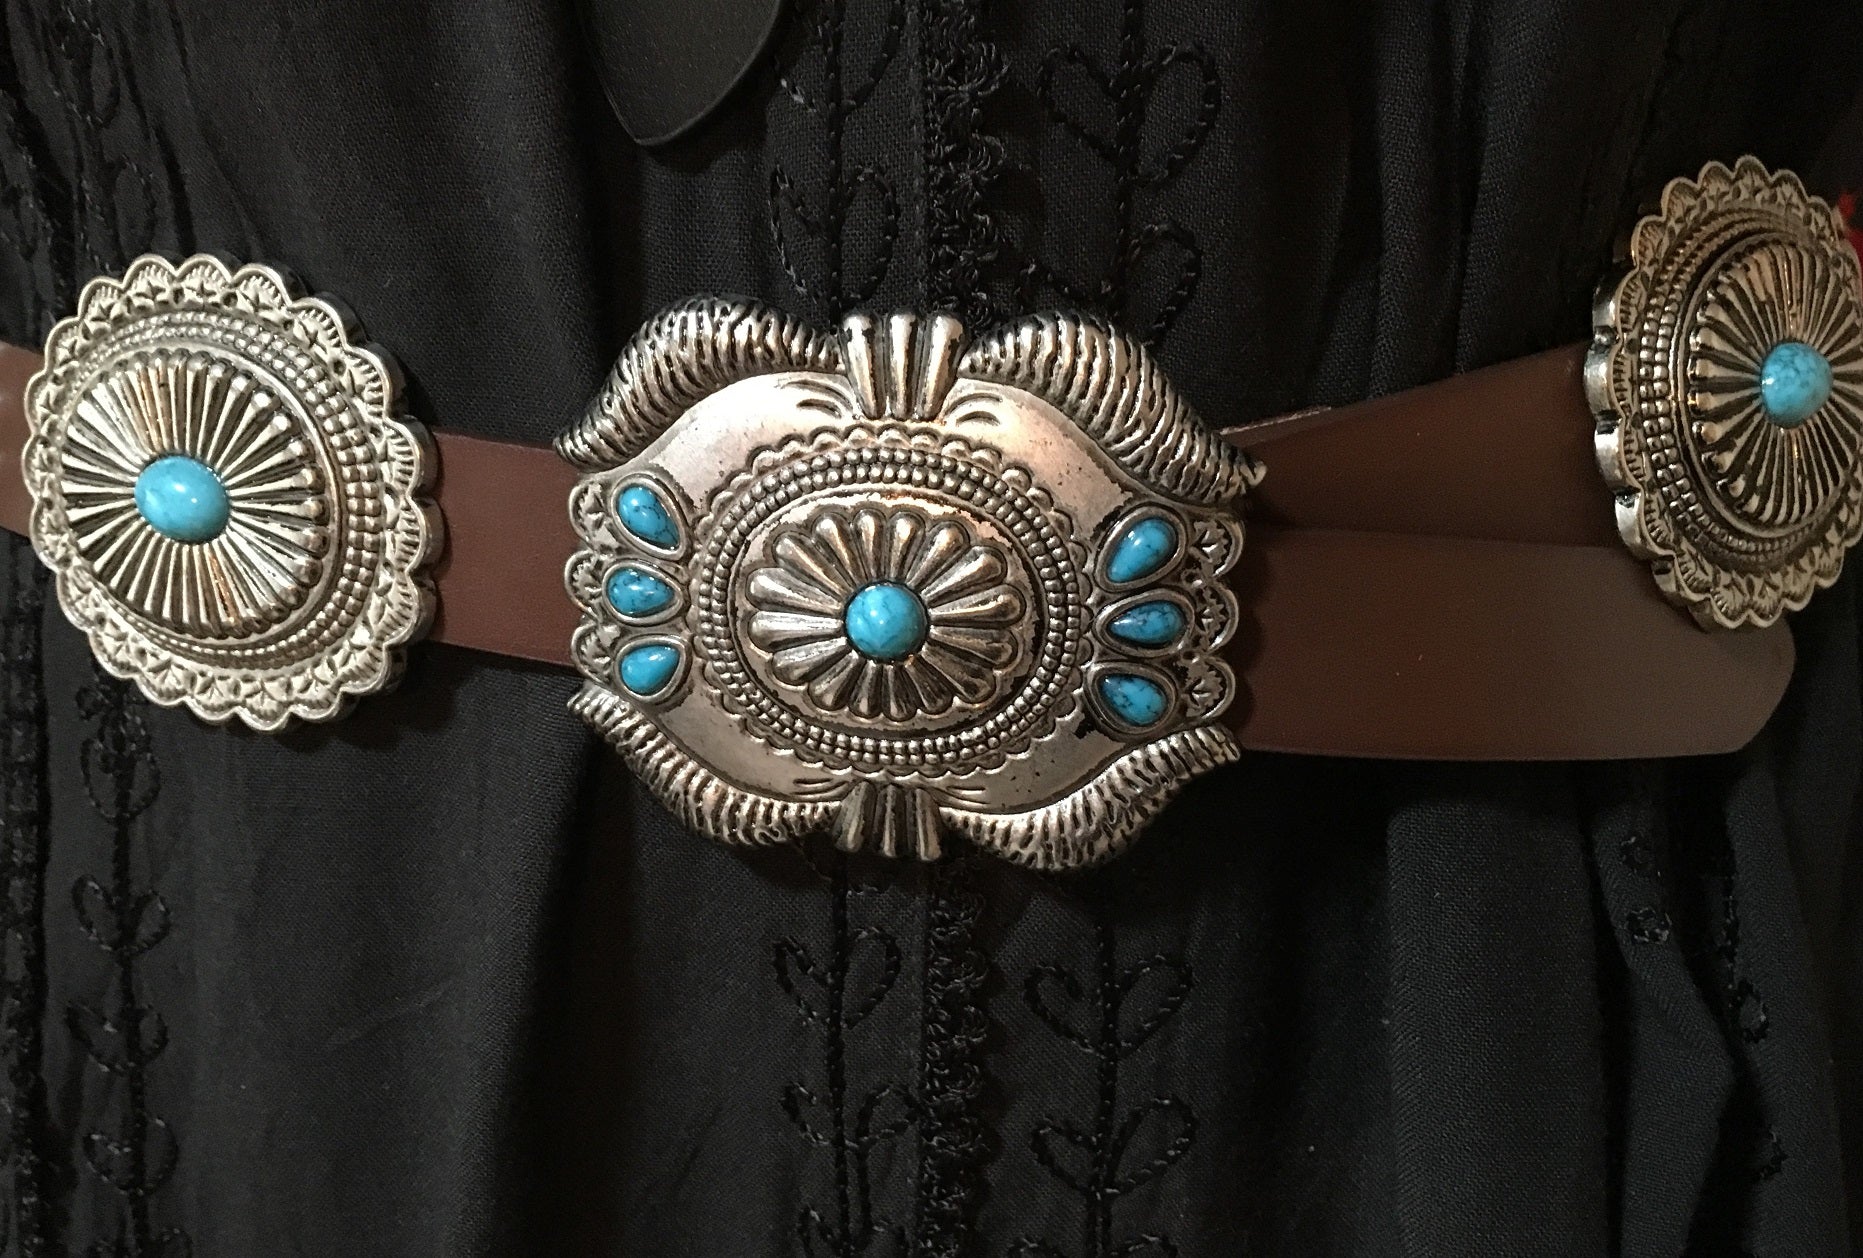 Western Fashion Brown Leather Belt with Oval Conchos and Faux Turquoise